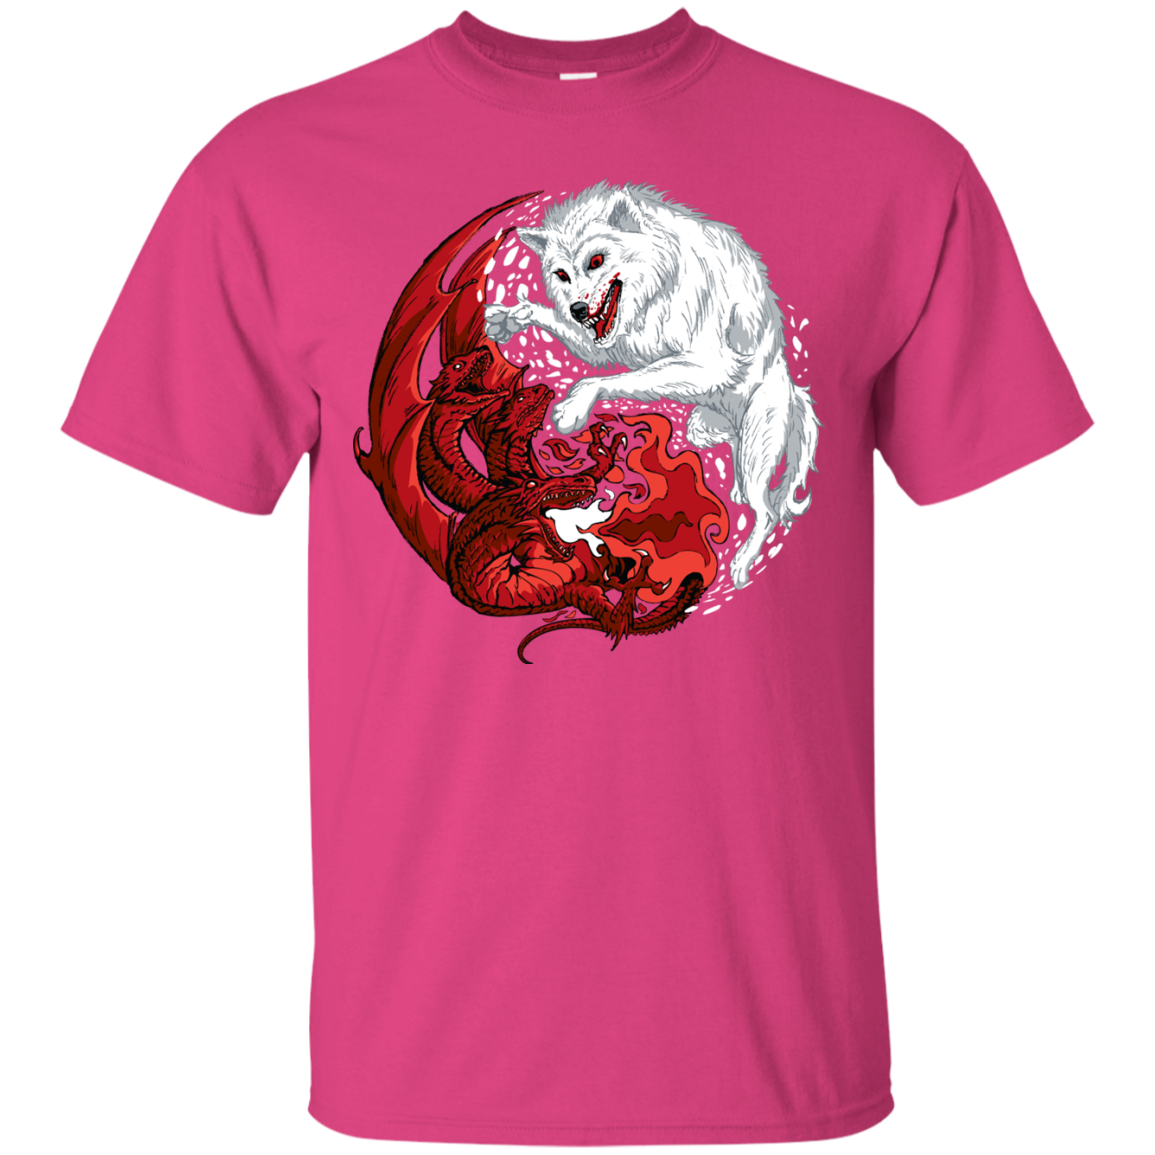 Ice and Fire T-Shirt